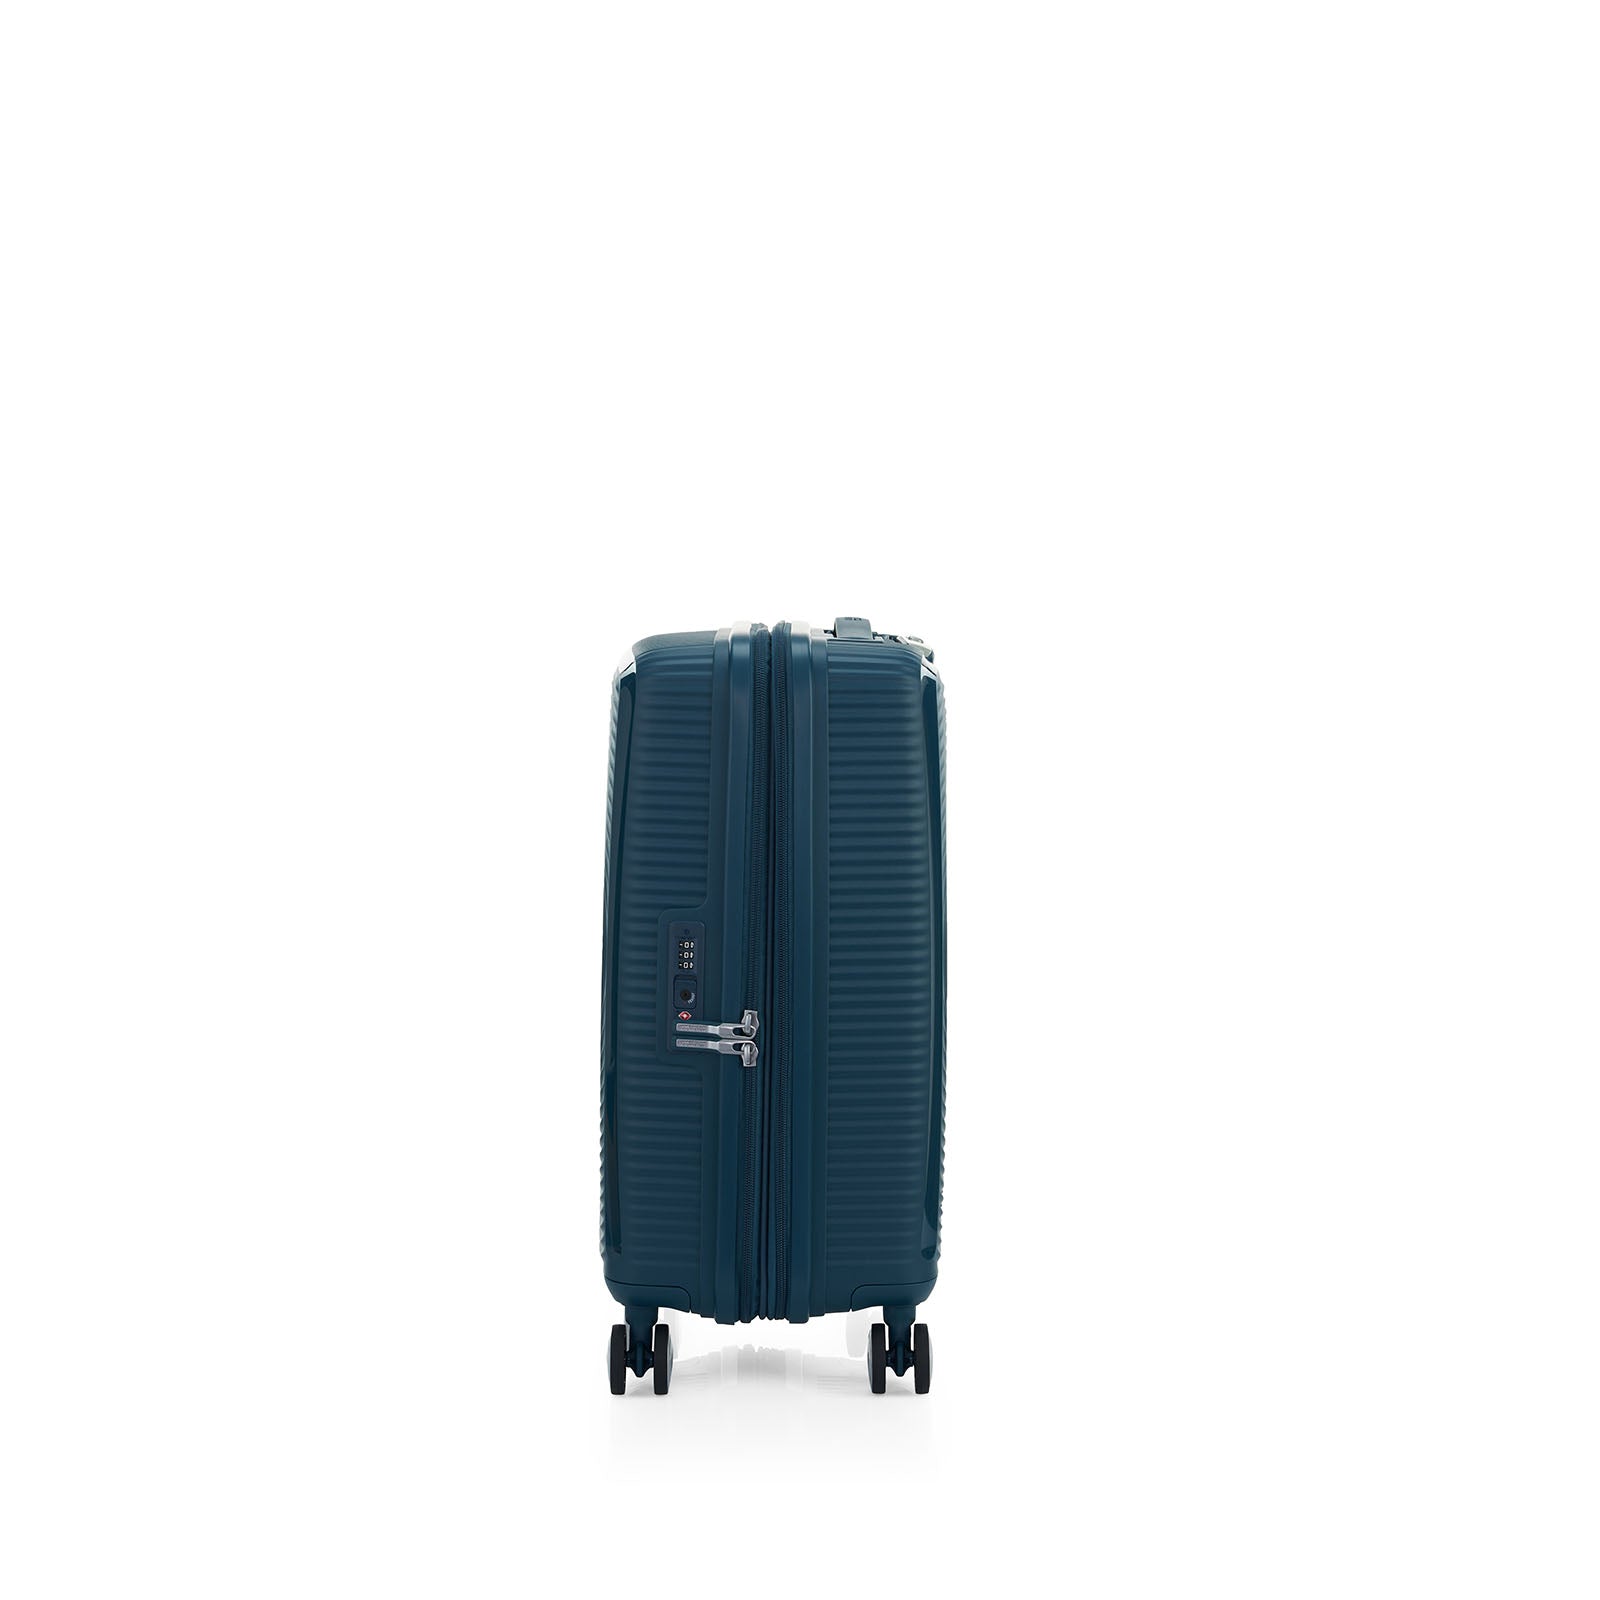 American-Tourister-Curio-2-55cm-Carry-On-Suitcase-Varisty-Green-Side-Handle